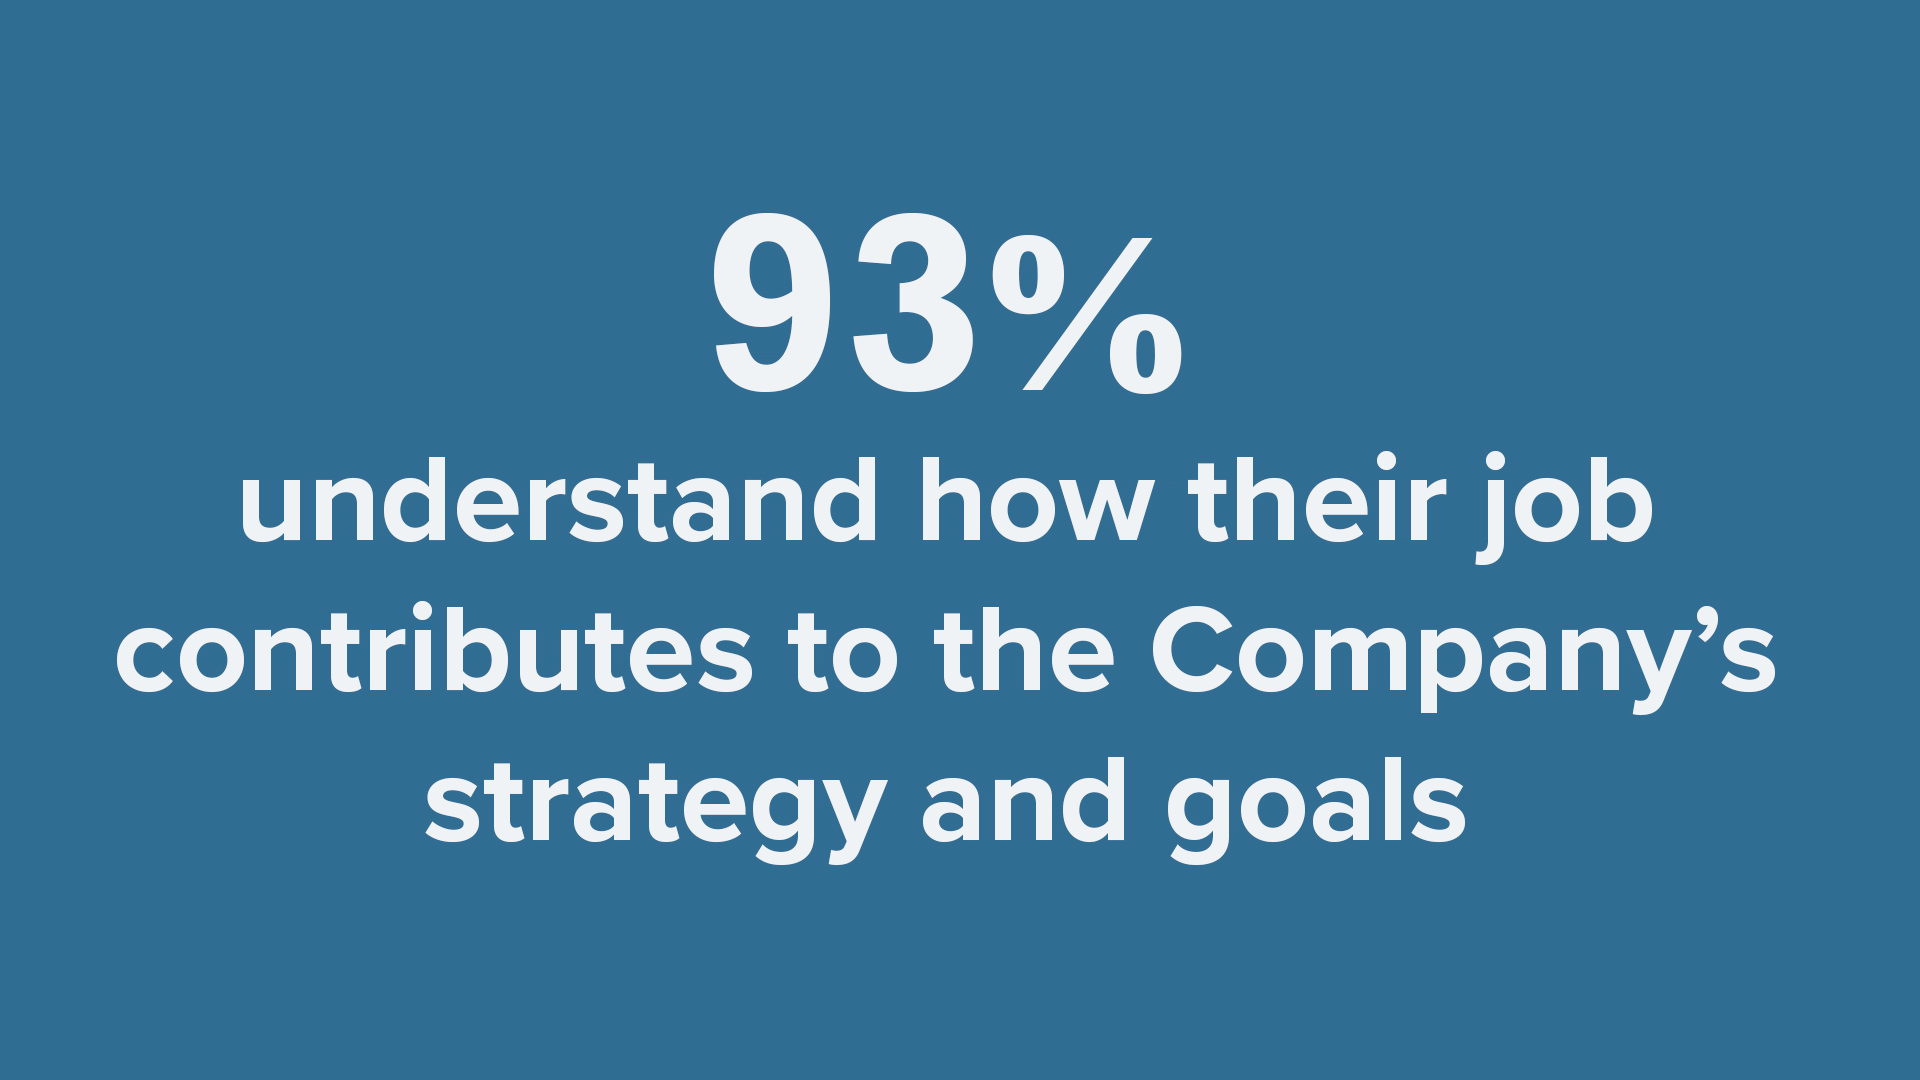 93% say their job positively contributes to the company's strategy and mission.